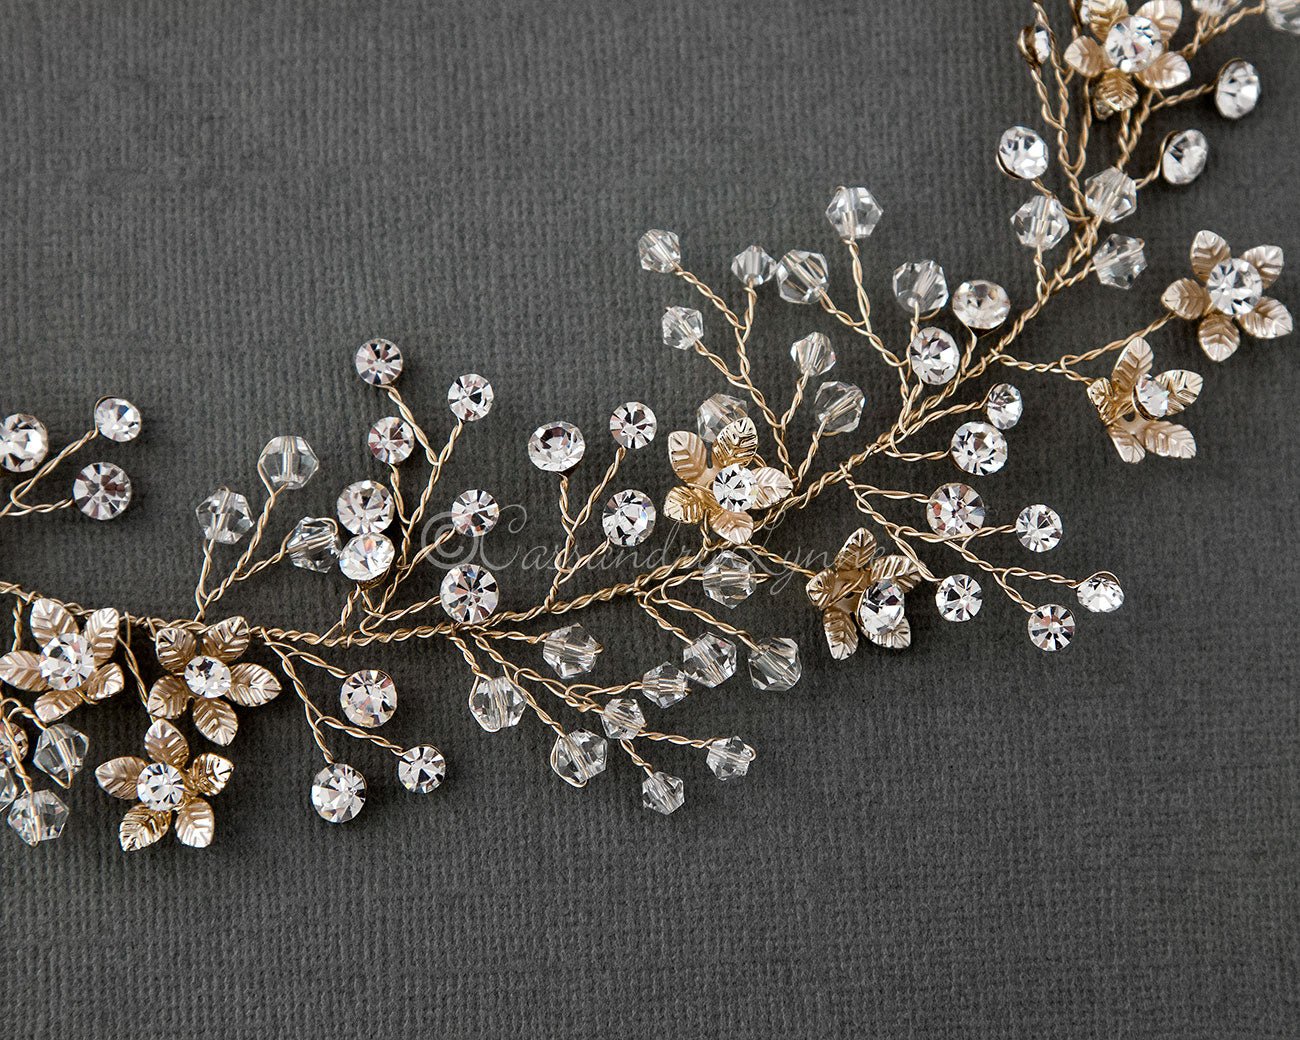 Crystal Bridal Hair Wrap with Flowers Gold